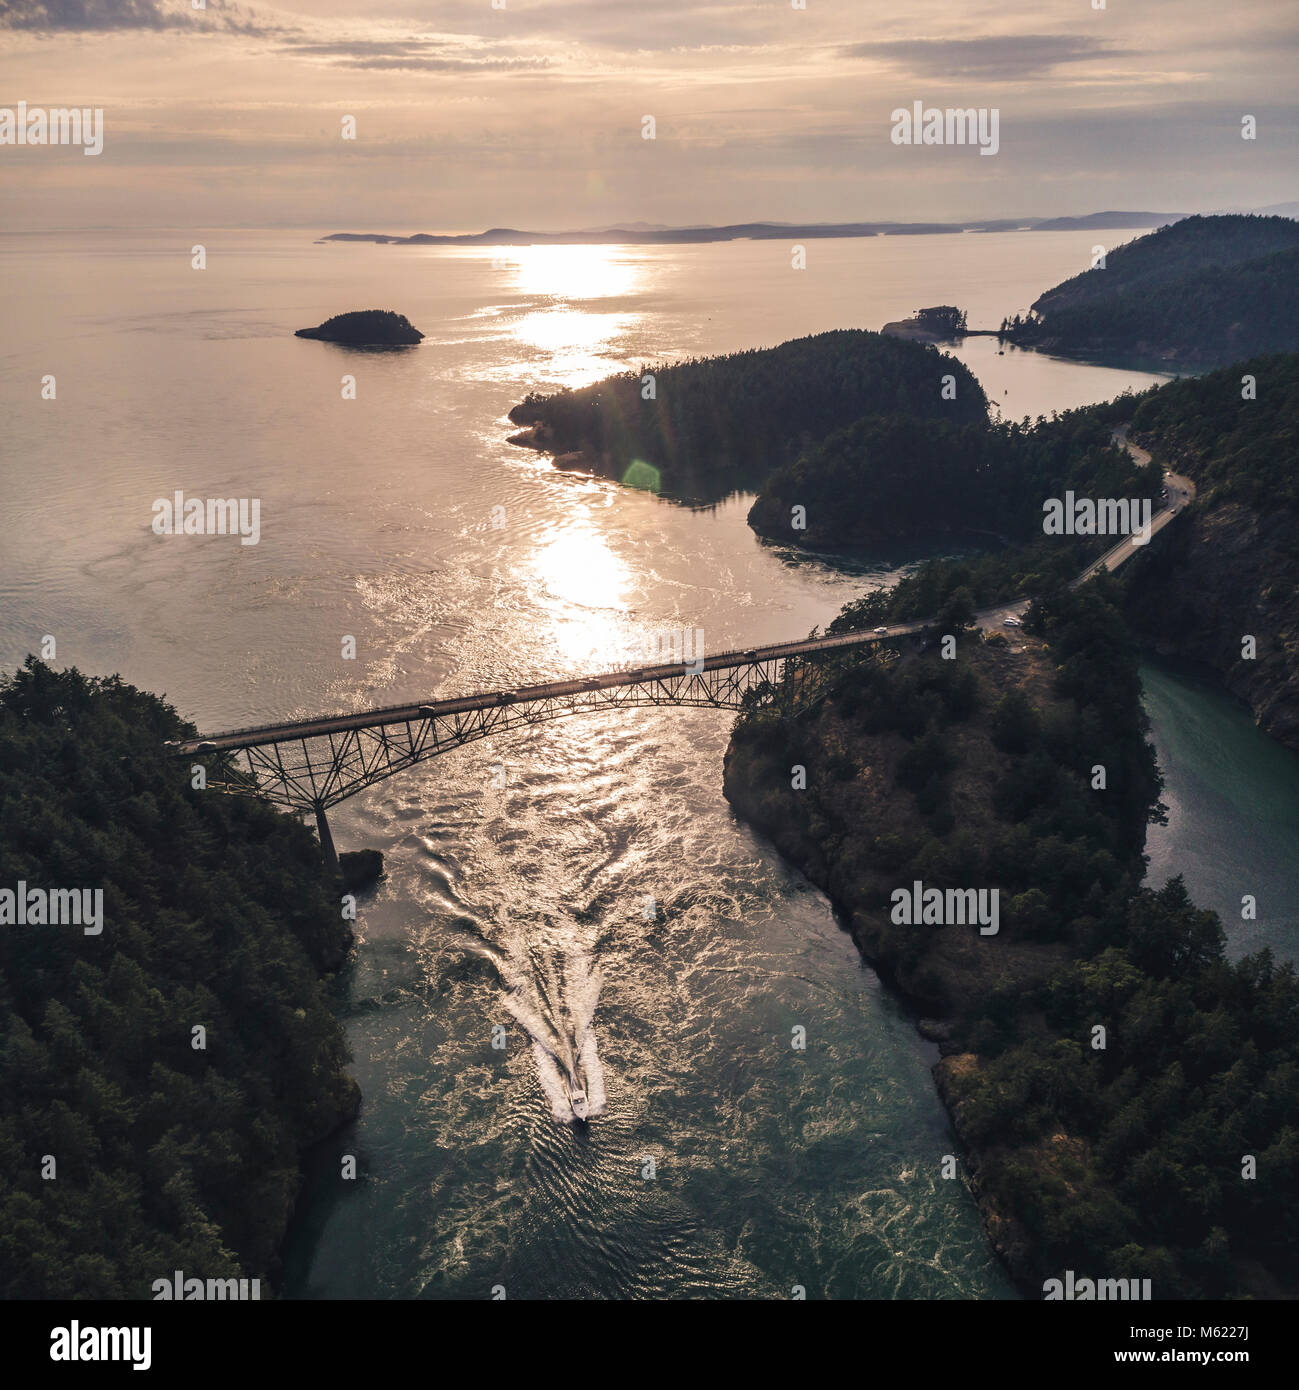 Helciopter view of Deception Pass Bridge at golden hour with colorful island contrast Stock Photo